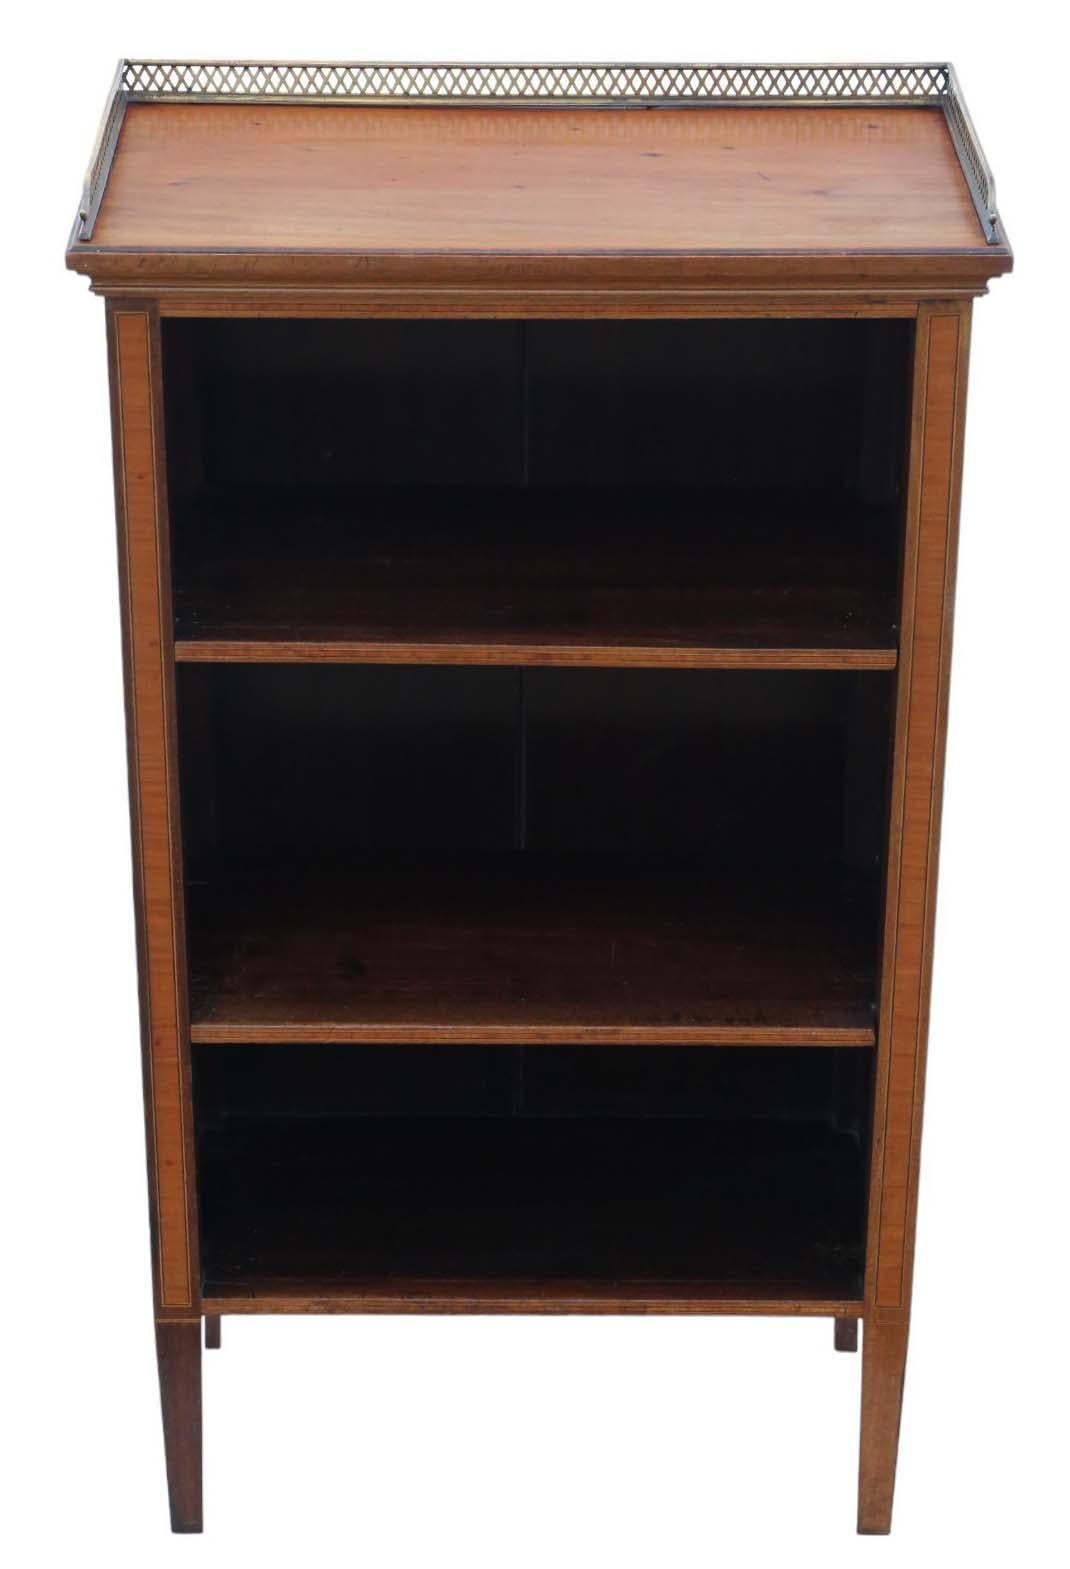 Antique C1900 Inlaid Mahogany Adjustable Bookcase Display Cabinet - Fine Quality In Good Condition For Sale In Wisbech, Cambridgeshire